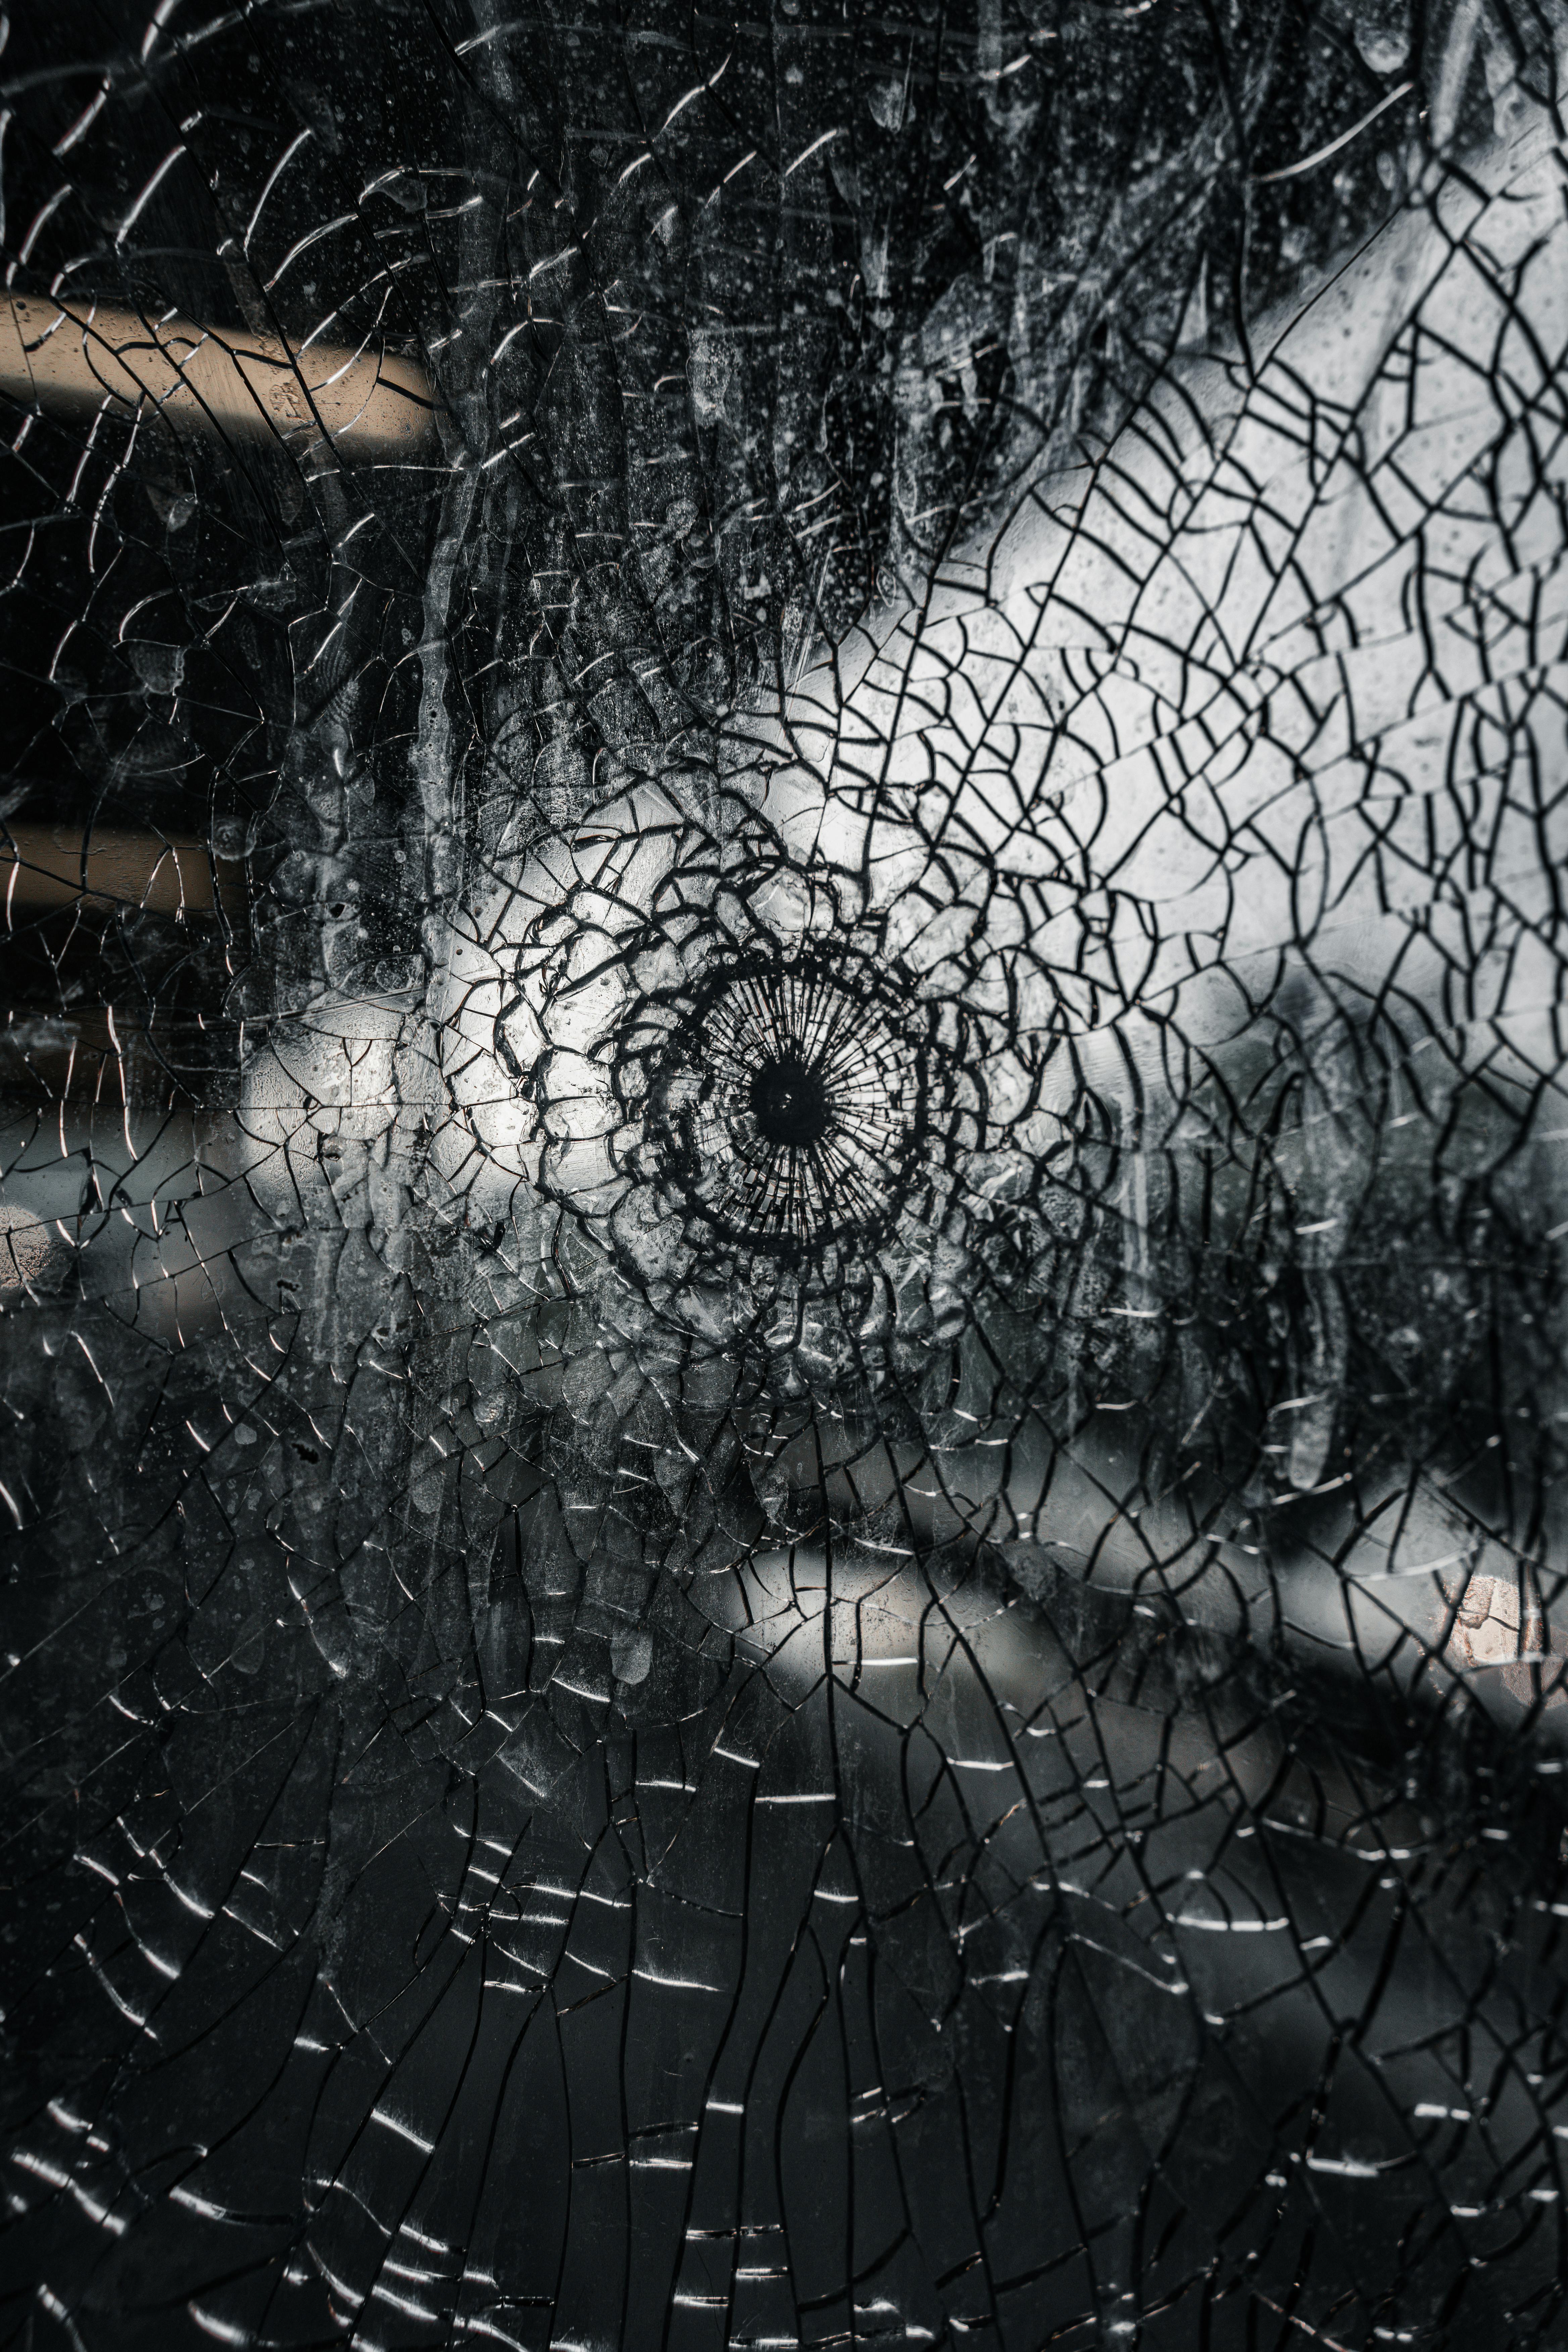 Broken Clear Glass Pieces on Black Surface · Free Stock Photo